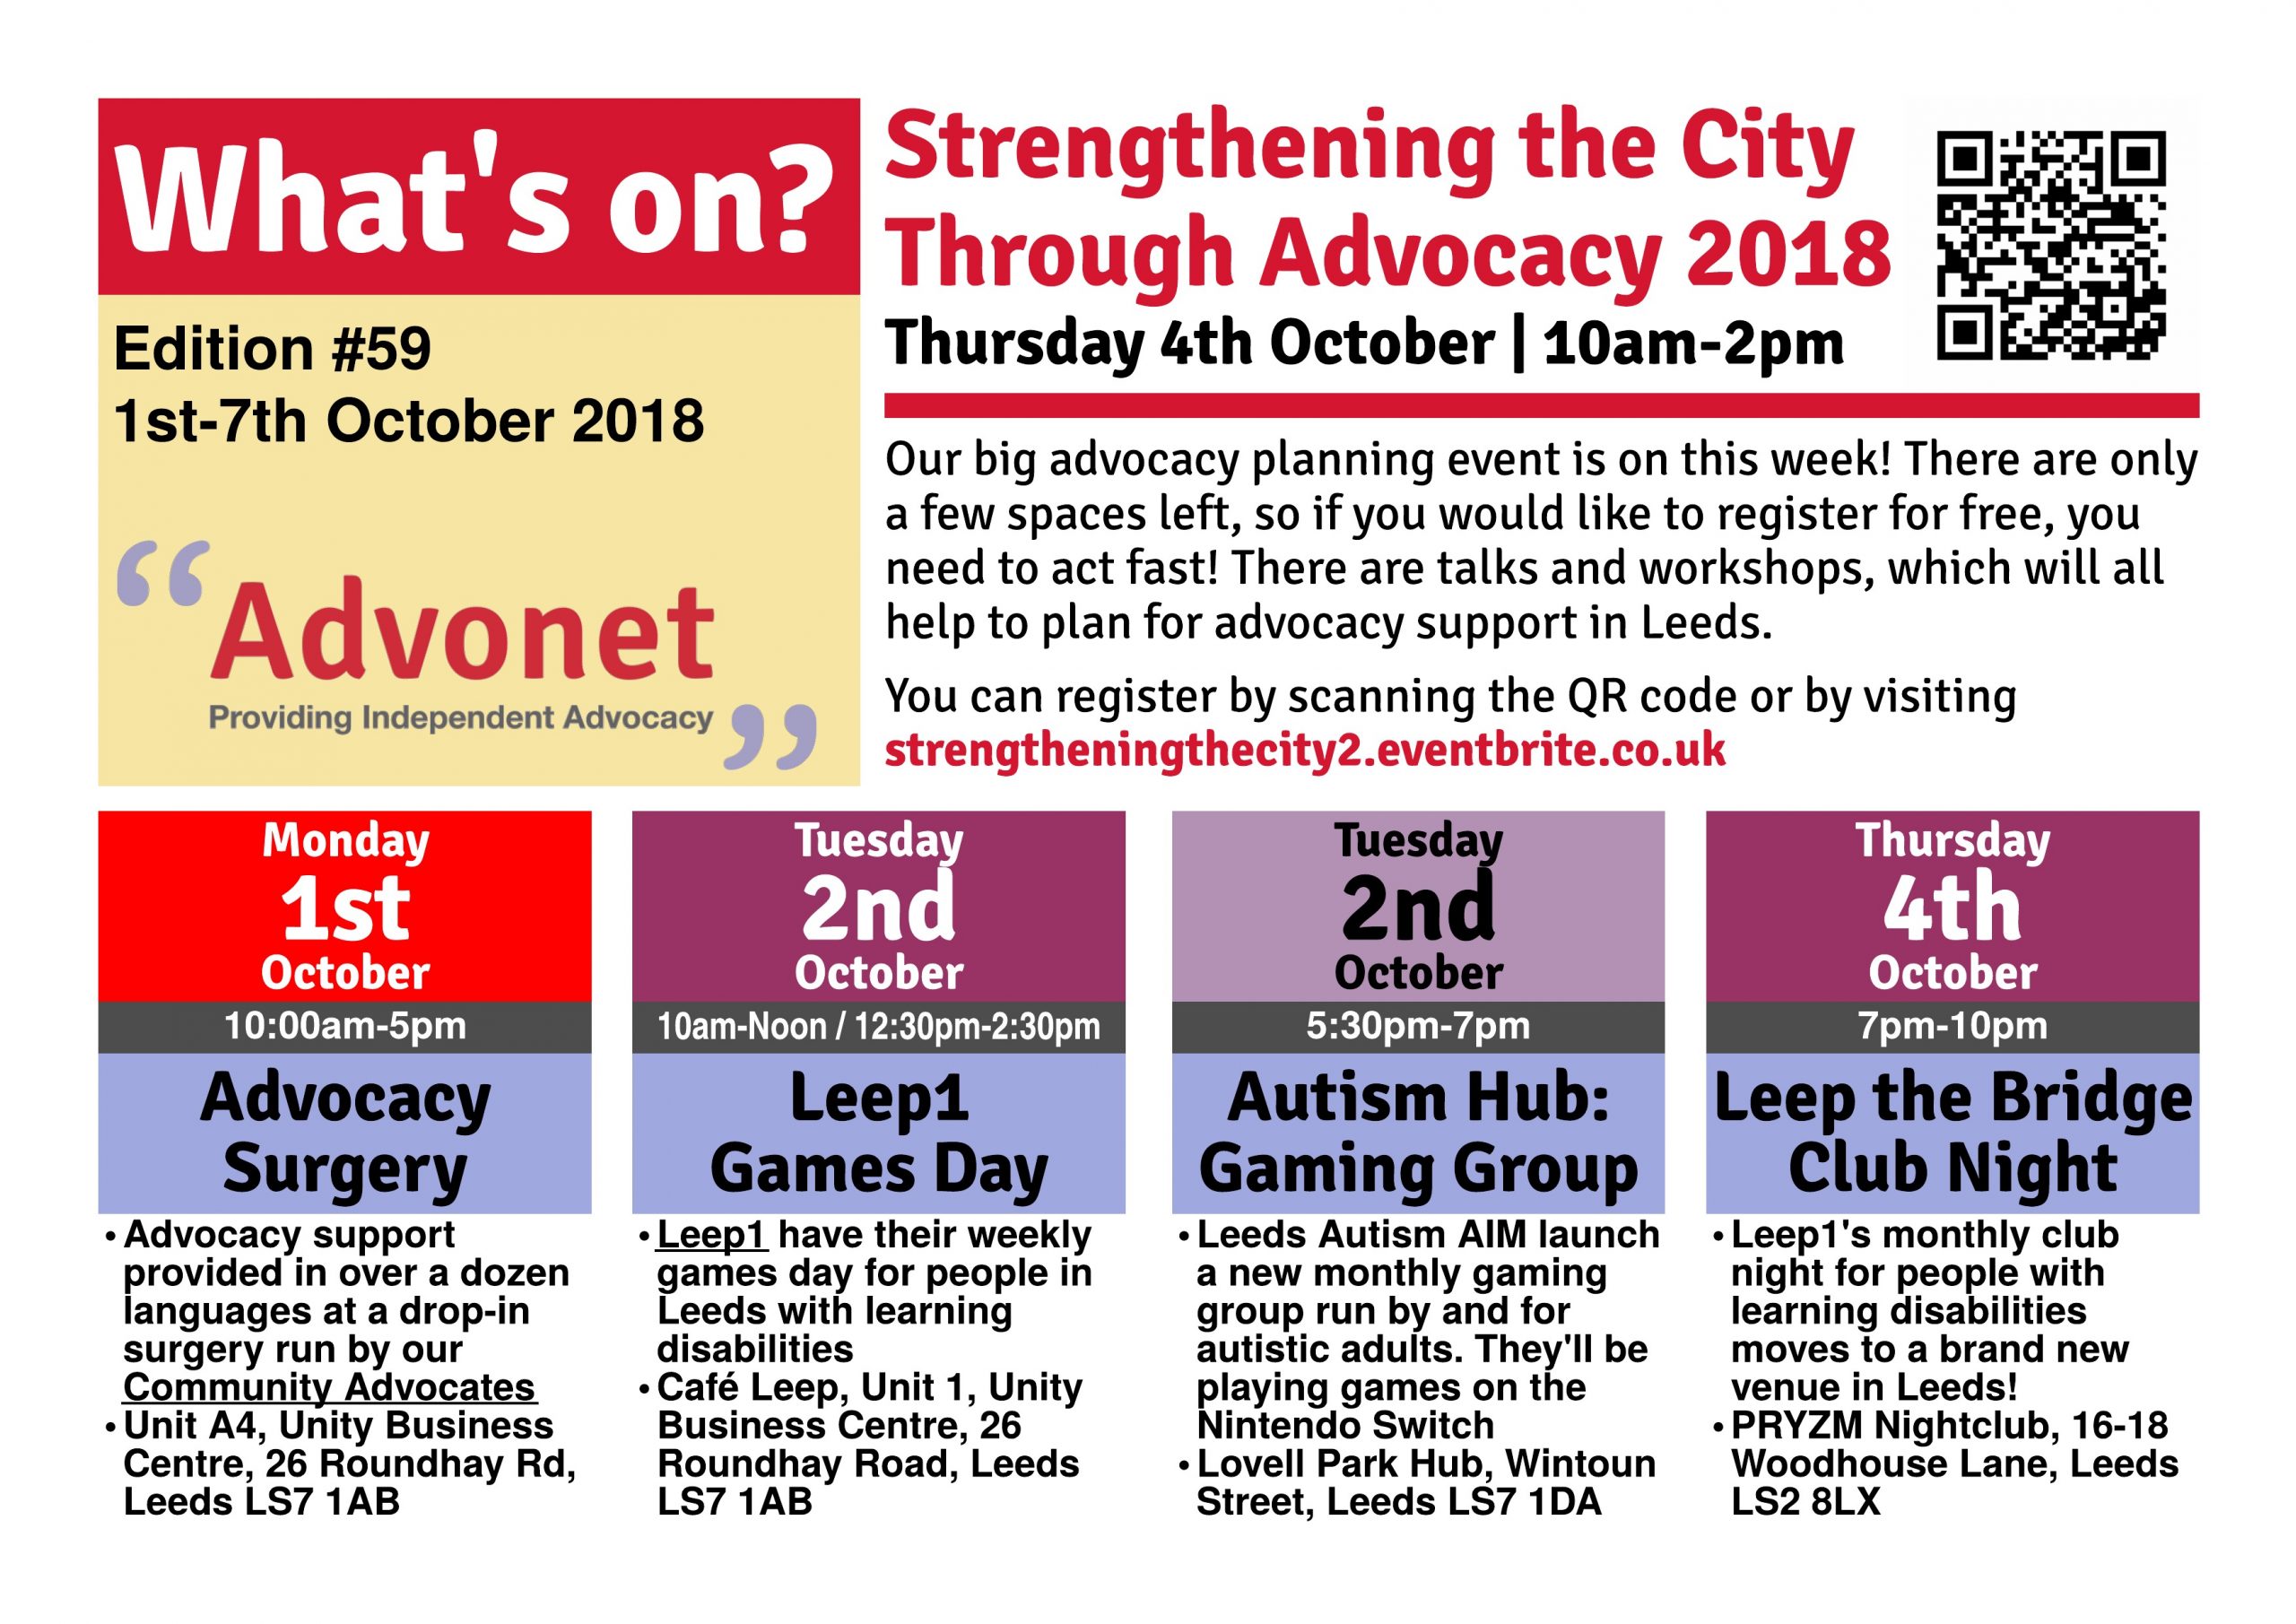 What's On - 1st-7th October 2018